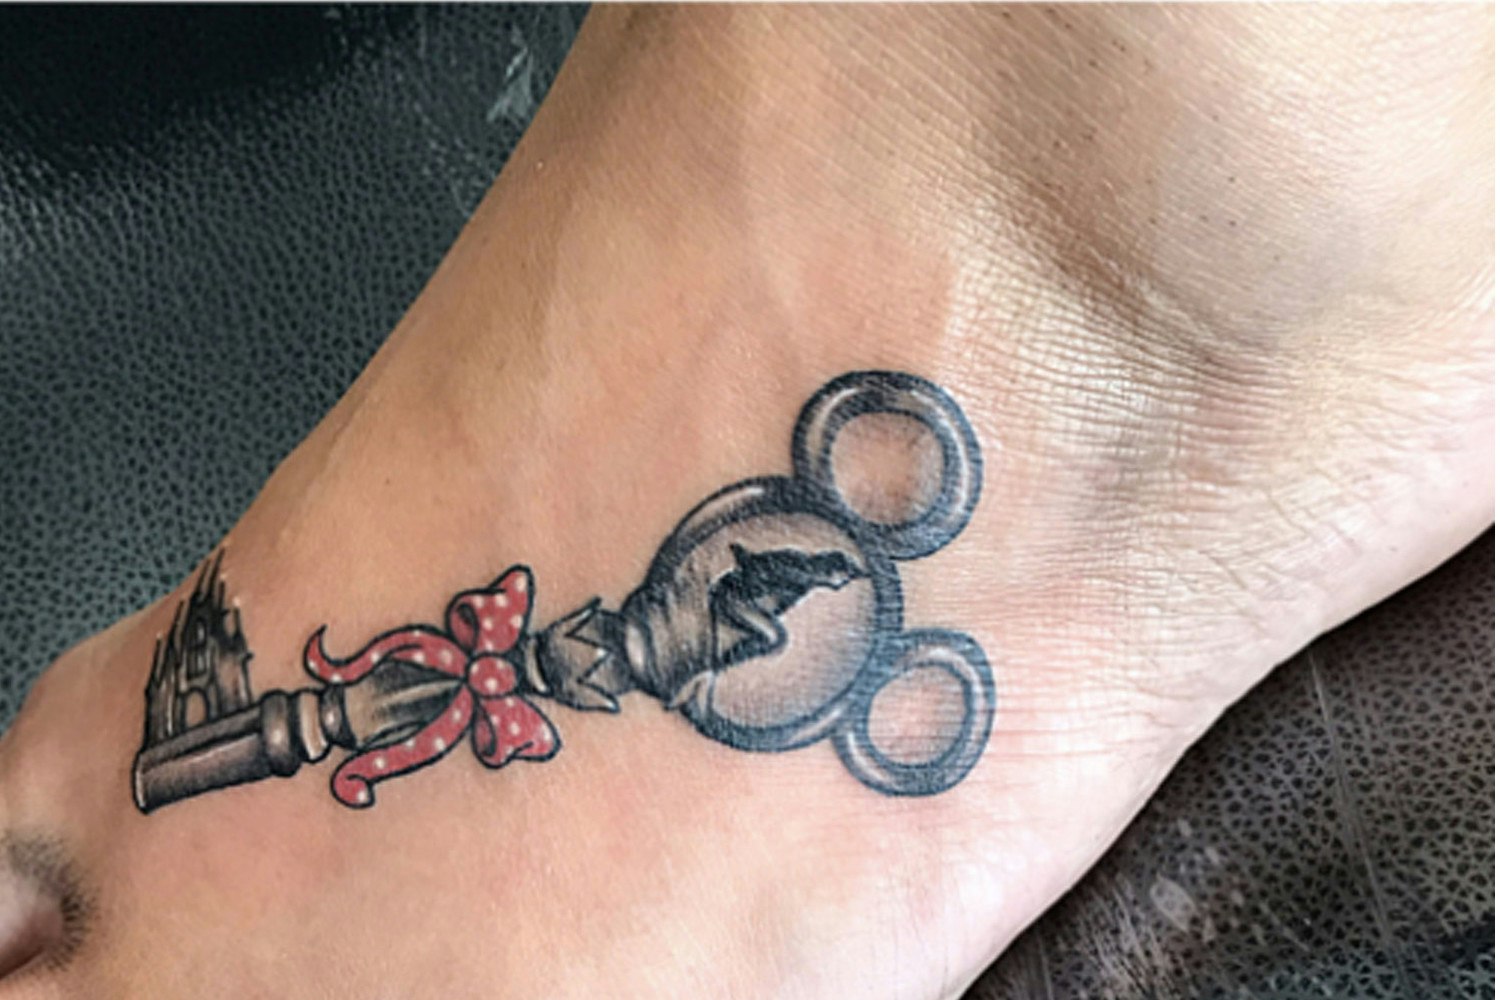 Disney Tattoos You'll Be Totally Obsessed With - Netmums